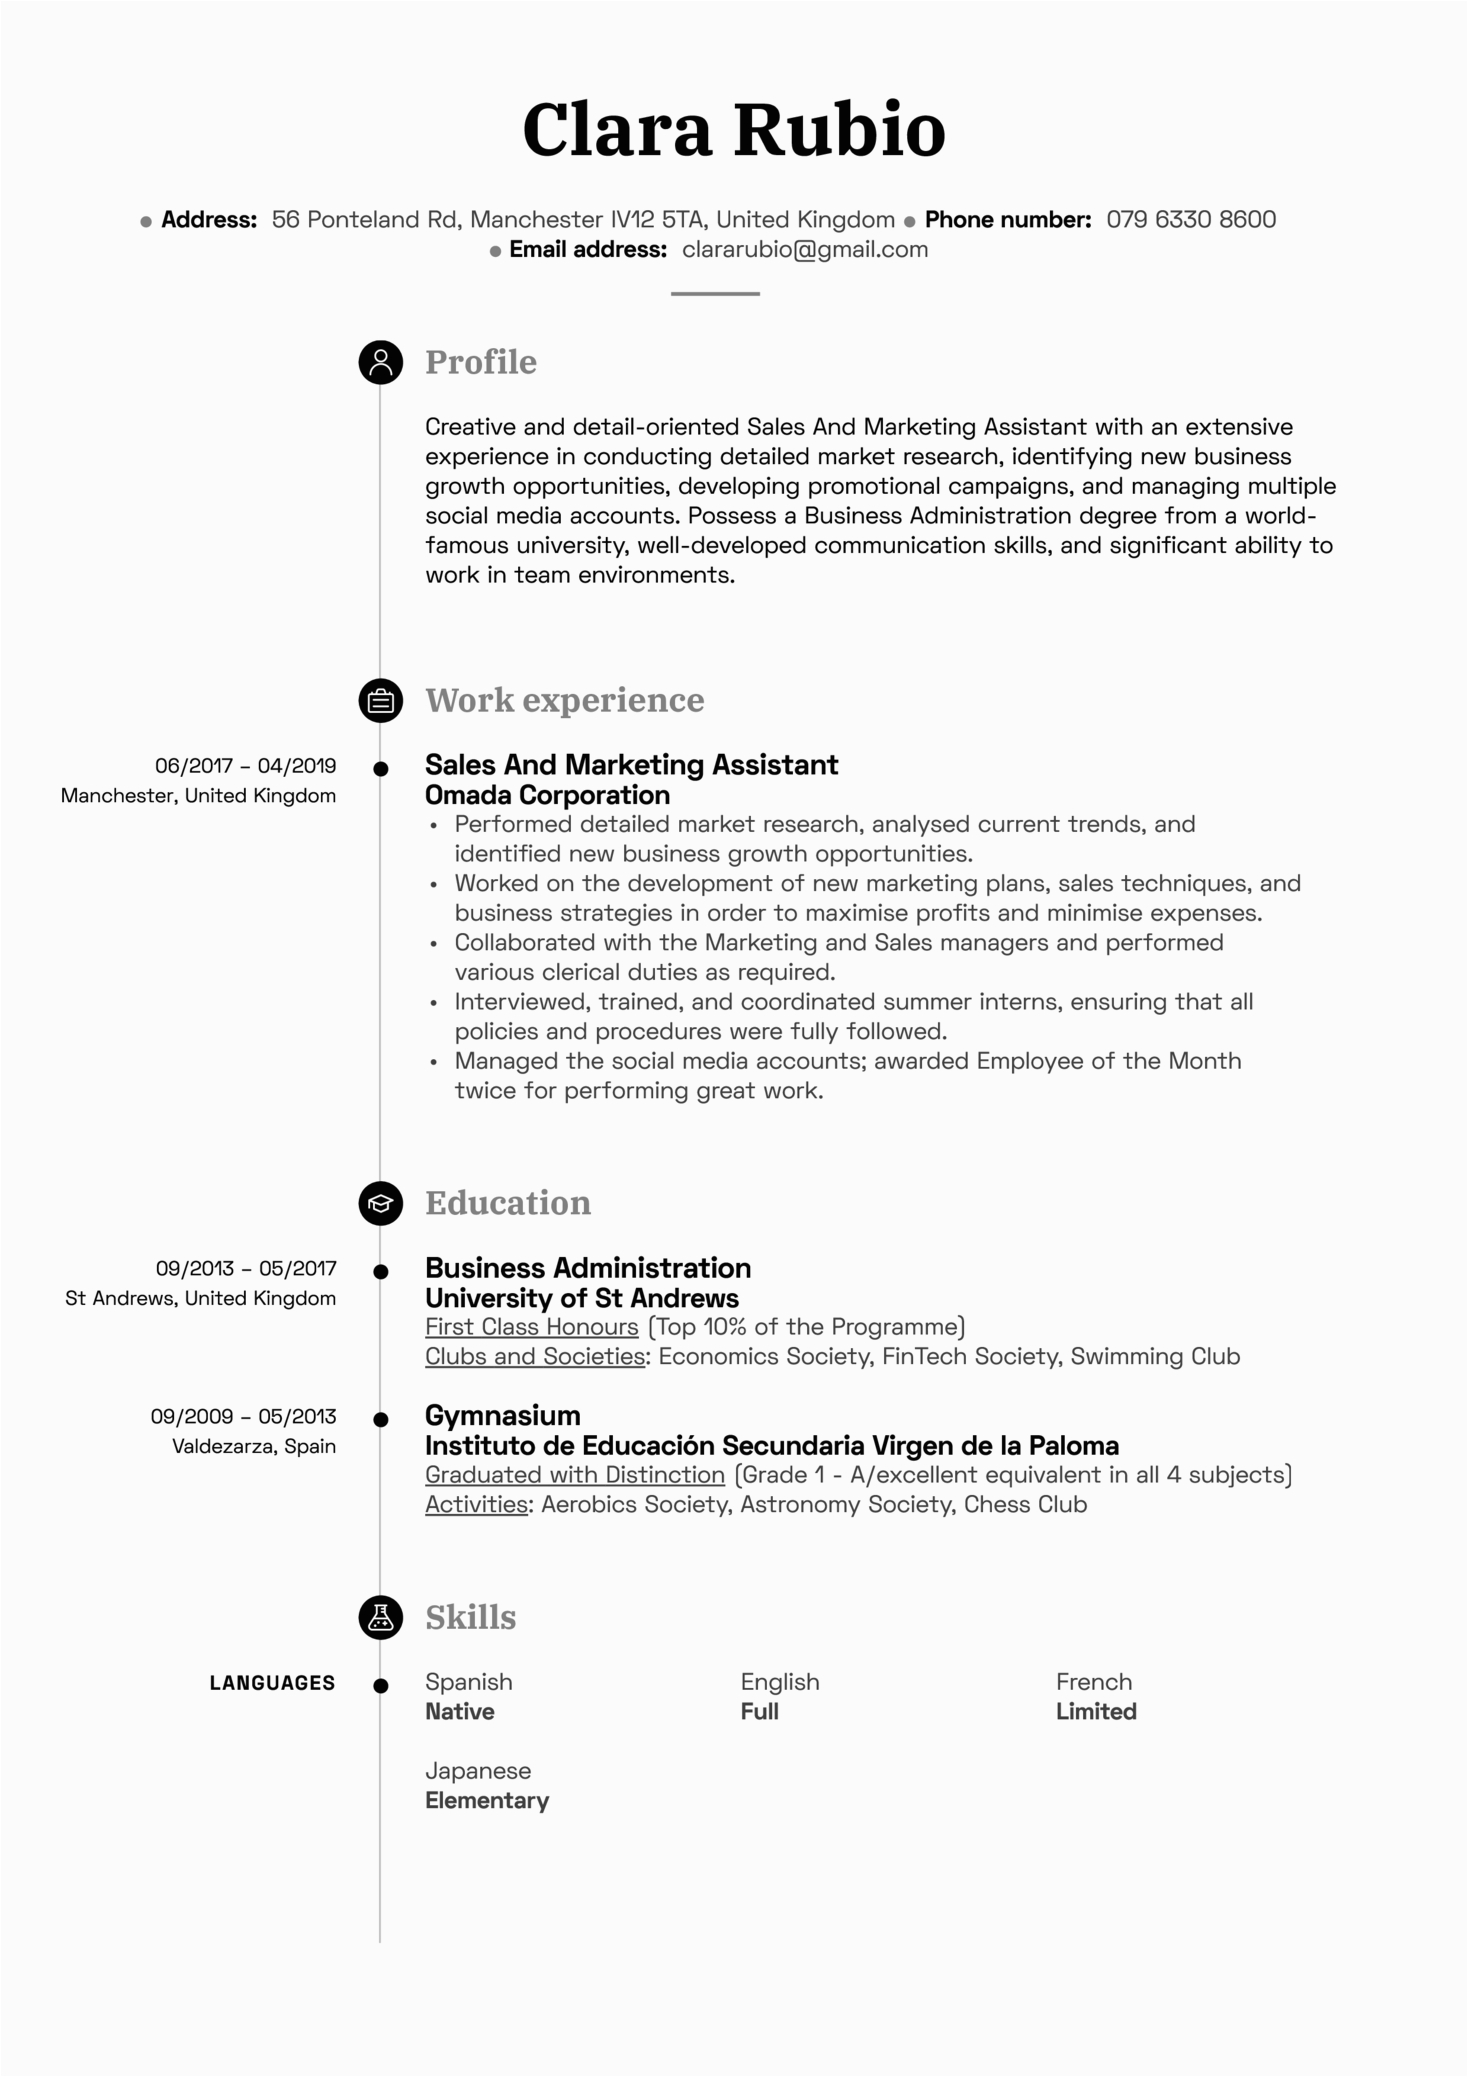 Sample Resume for Sales and Marketing assistant Sales and Marketing assistant Resume Sample